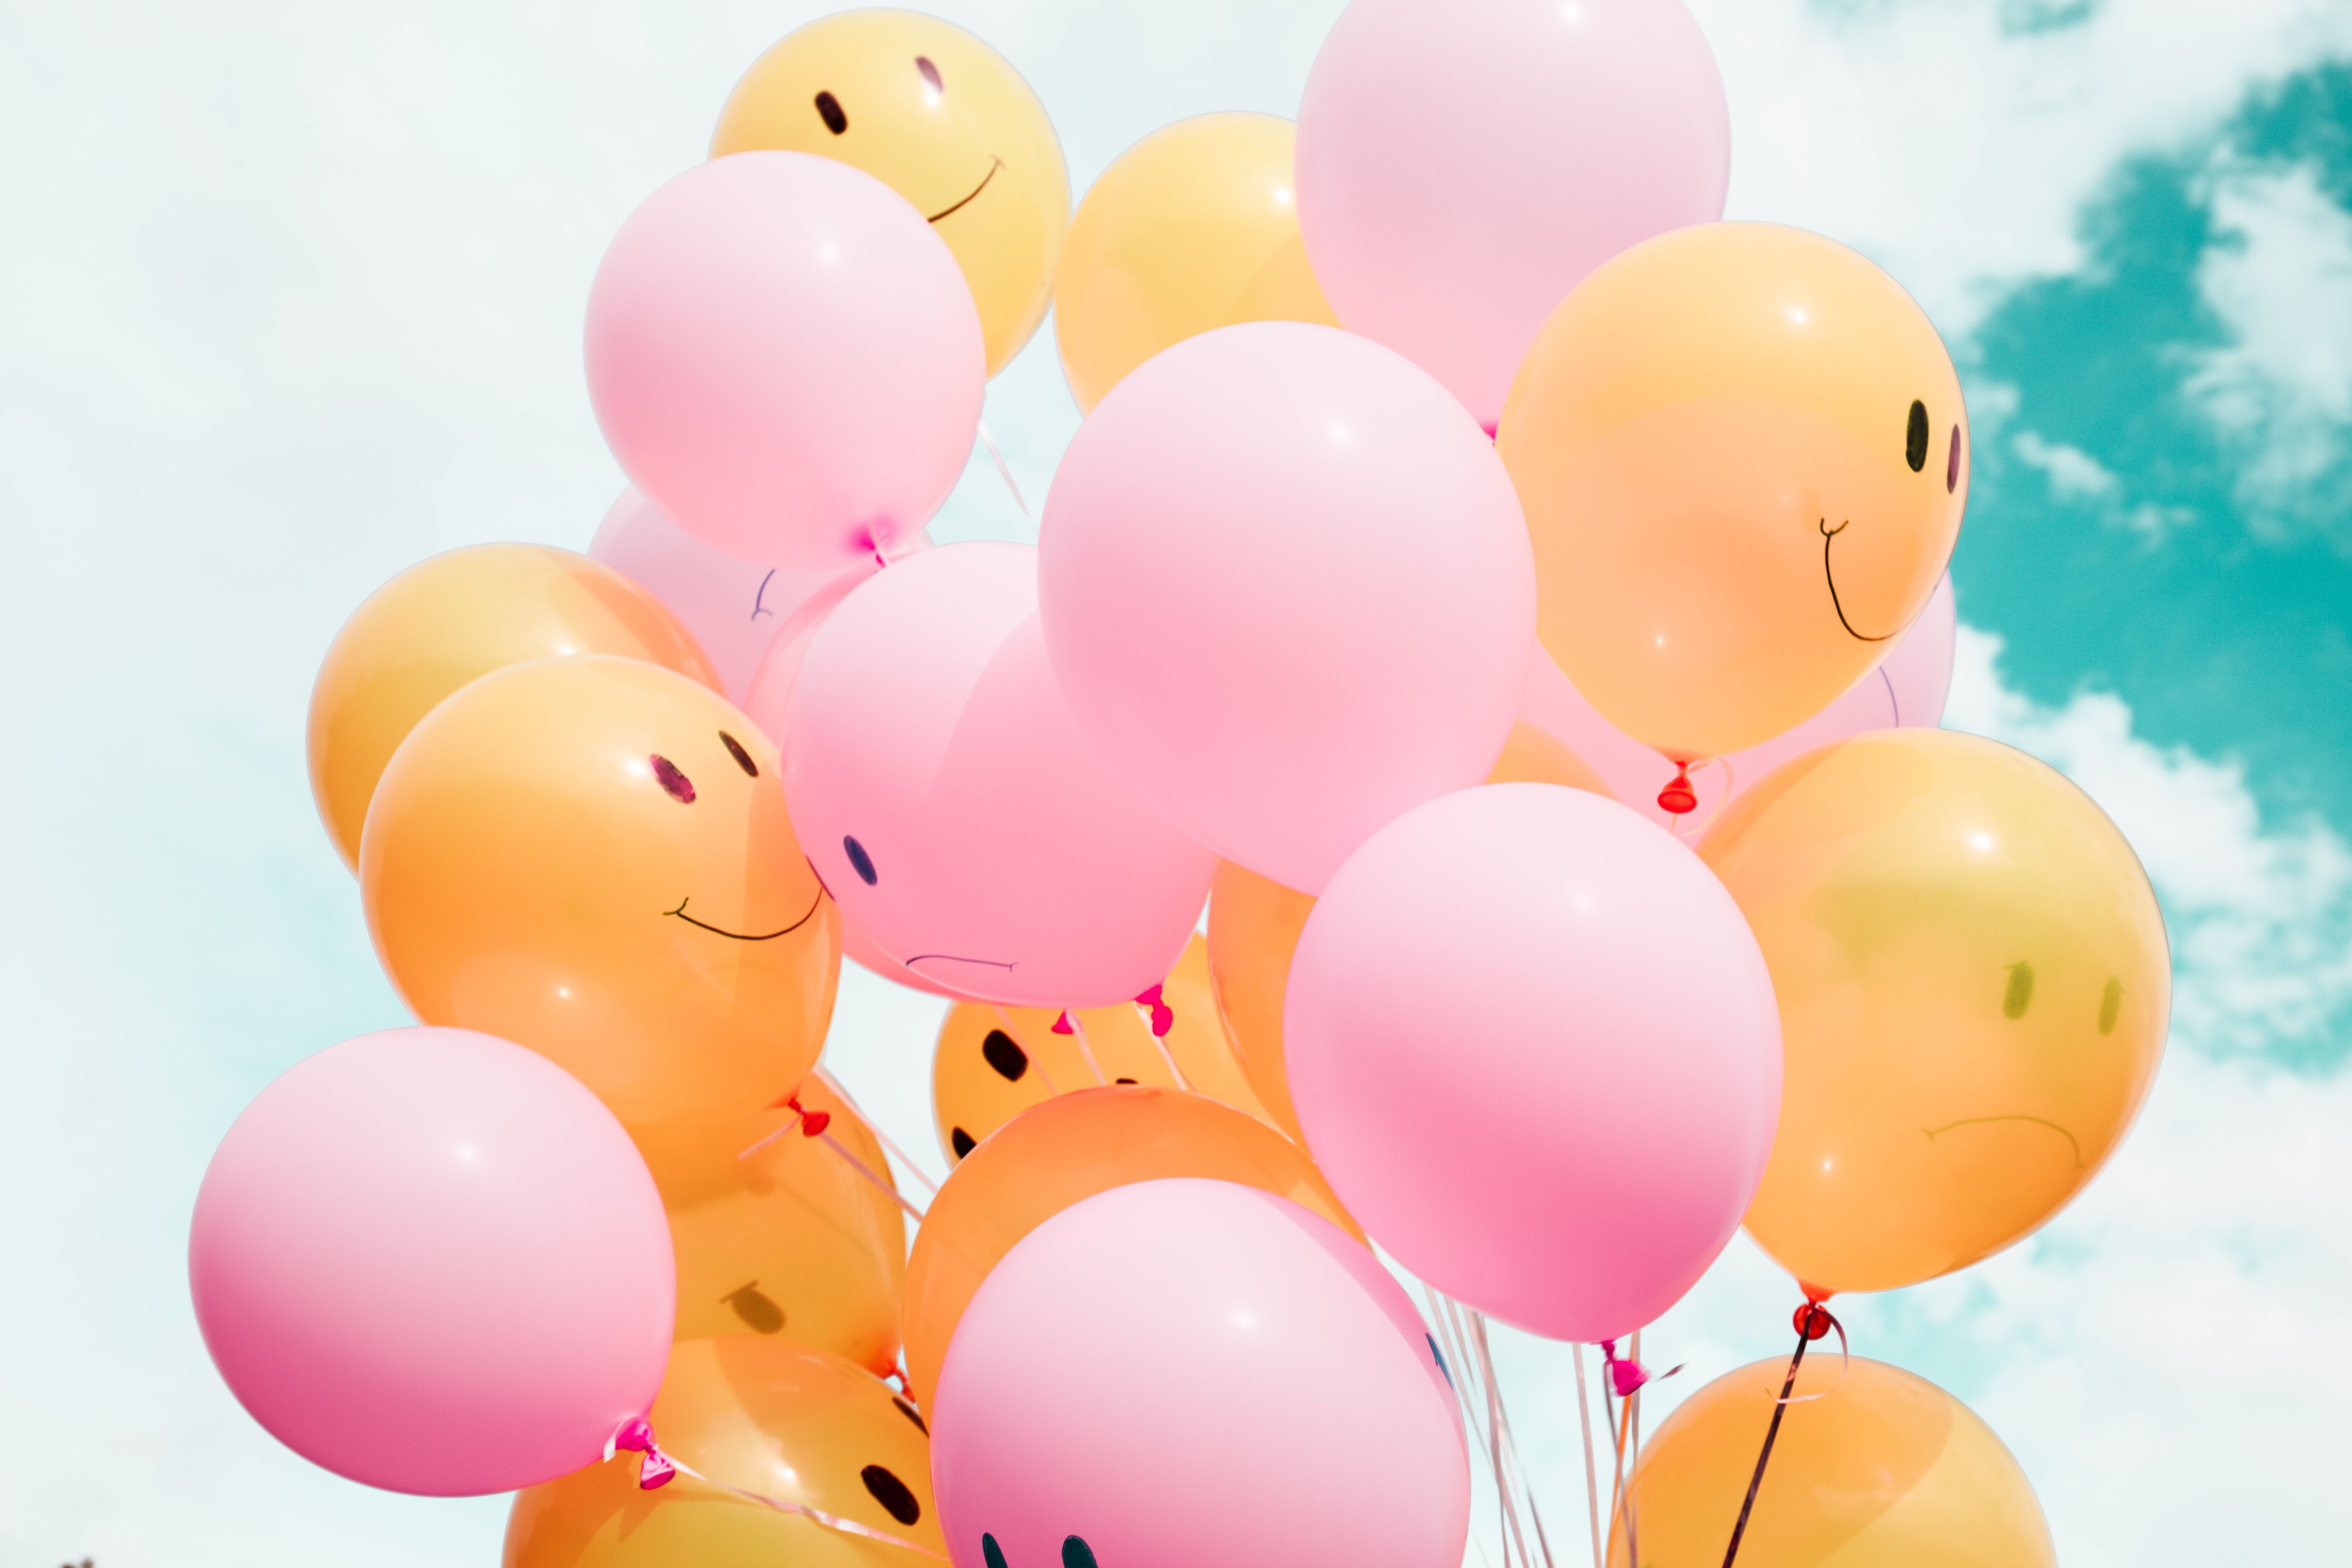 A bunch of balloons with smiley faces on them.